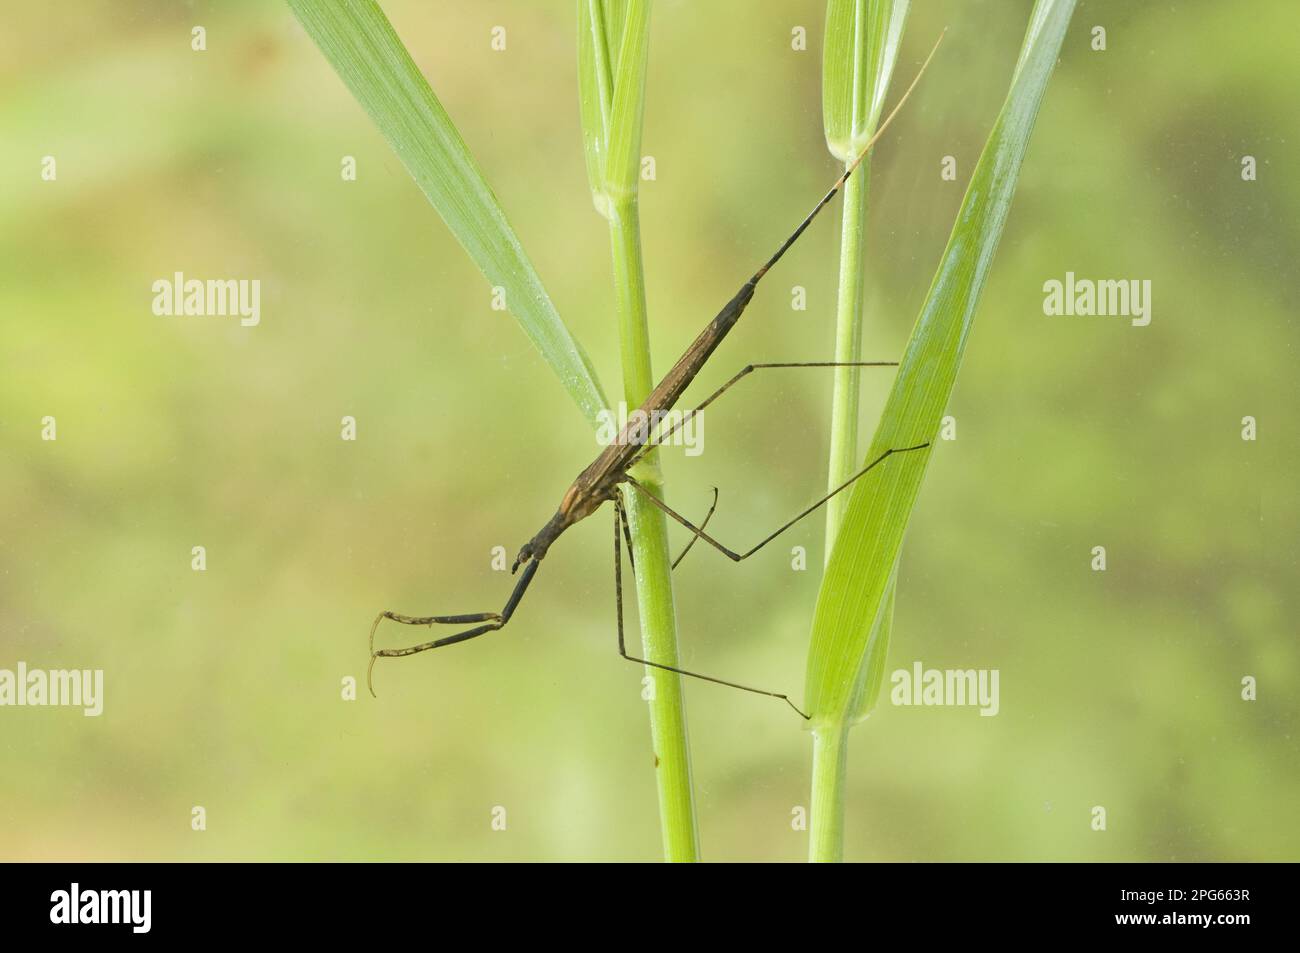 Stick bug, Water needle (Ranatra linearis), Stick bugs, Water needles, Other animals, Insects, Animals, Bug, Bugs, Water stick insect adult, clinging Stock Photo